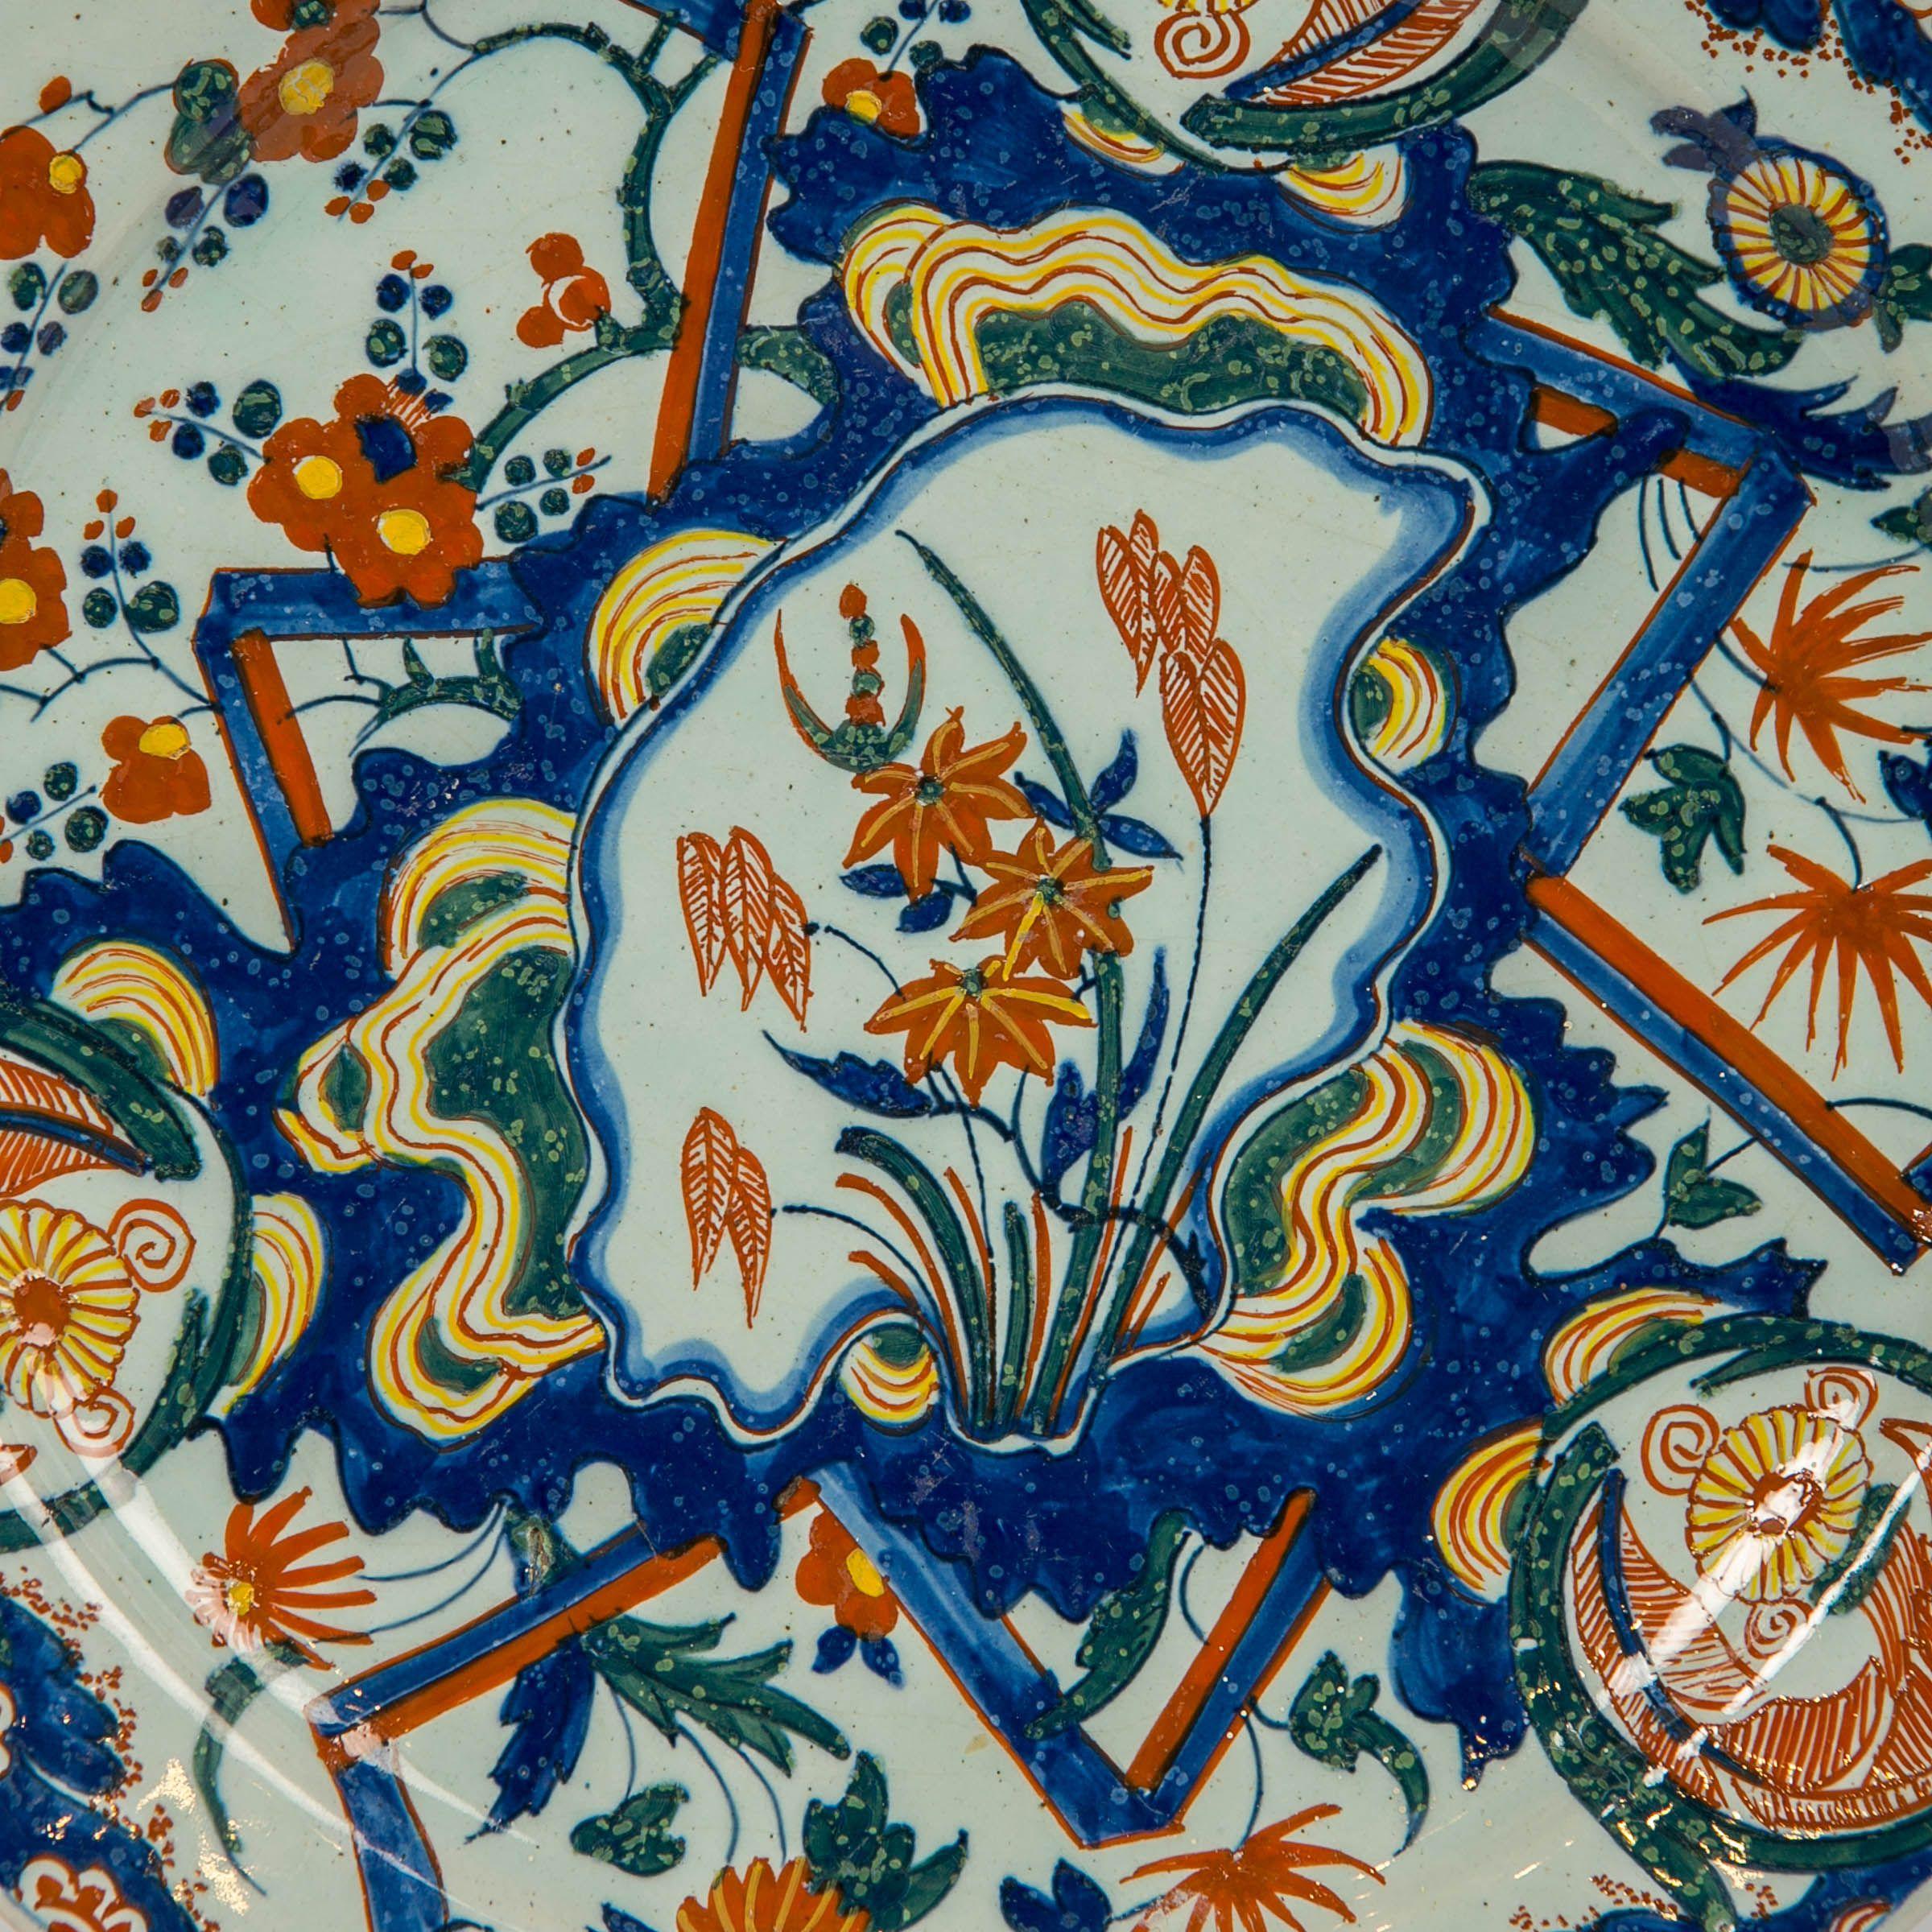 Why we love it: It's unique and beautiful!
Provenance: Delft Ceramics at the Philadelphia Museum of Art, by E B Schaap pg. 53.
The pattern on this plate is known as the 